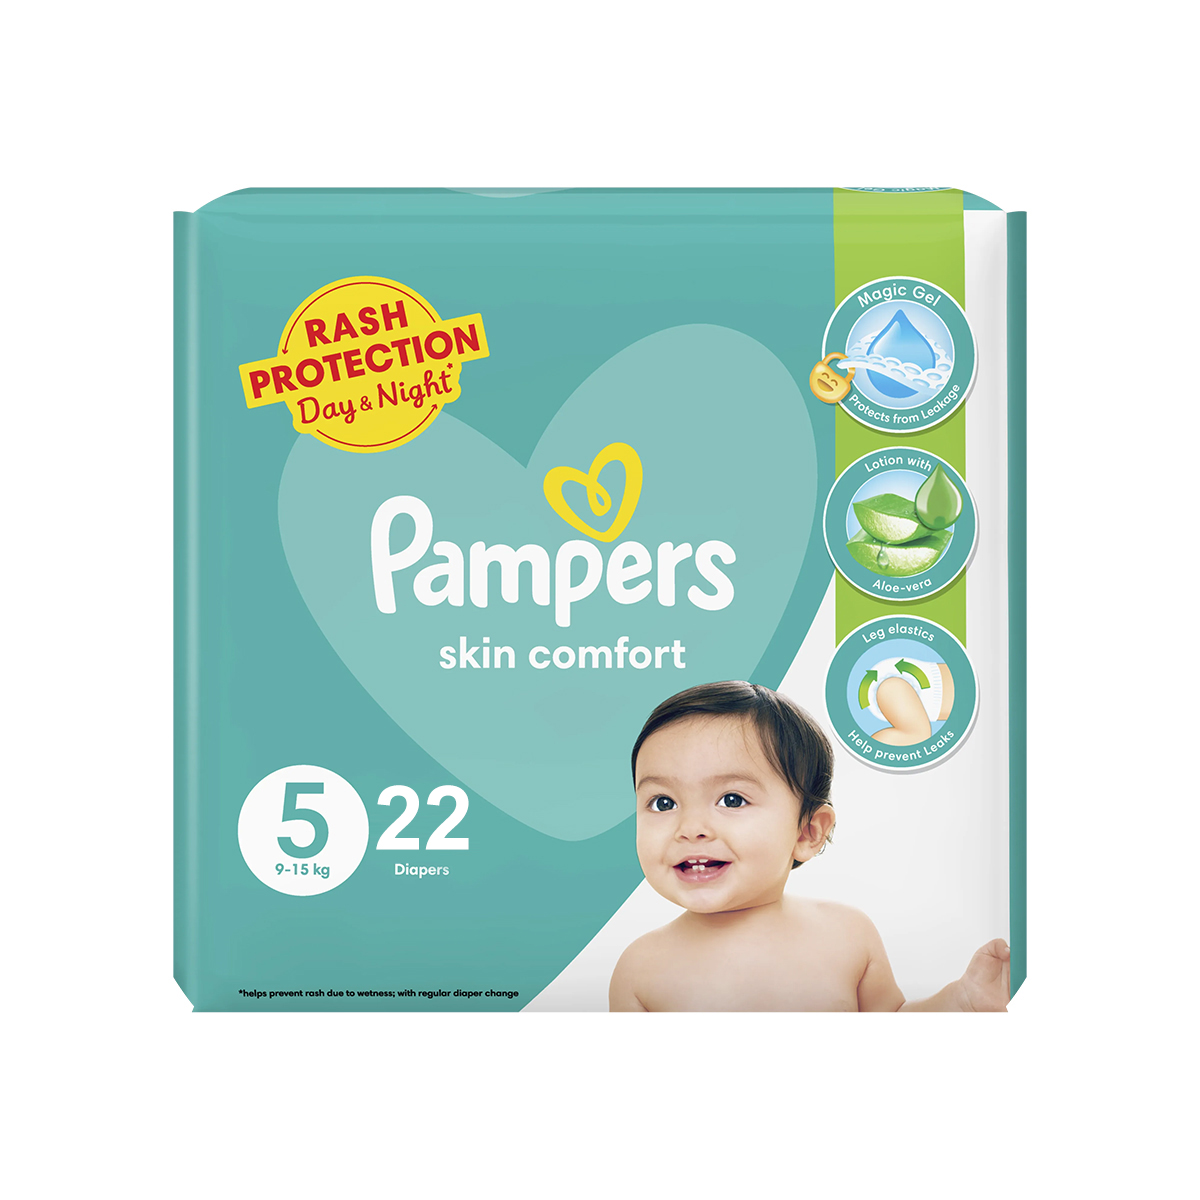 Pampers Taped Baby Diapers (size 5 Junior, 22 Pcs)